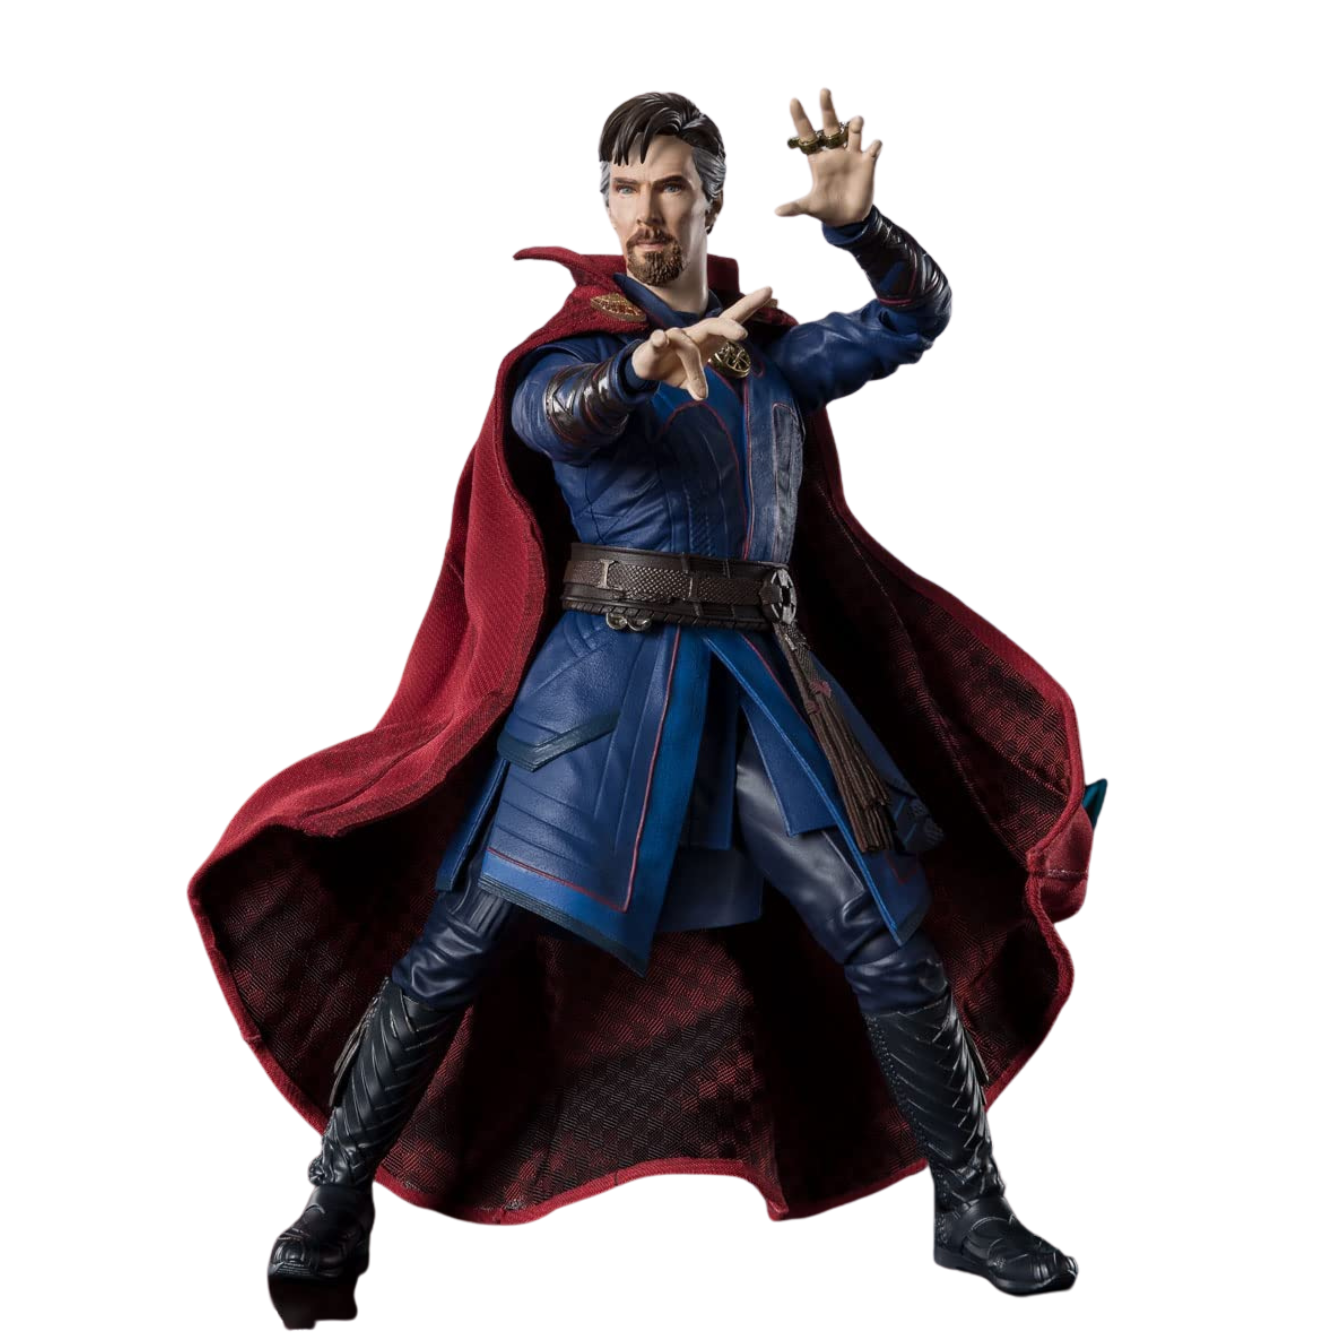 Tamashi Nations - Doctor Strange in The Multiverse of Madness Bandai Spirits S.H.Figuarts